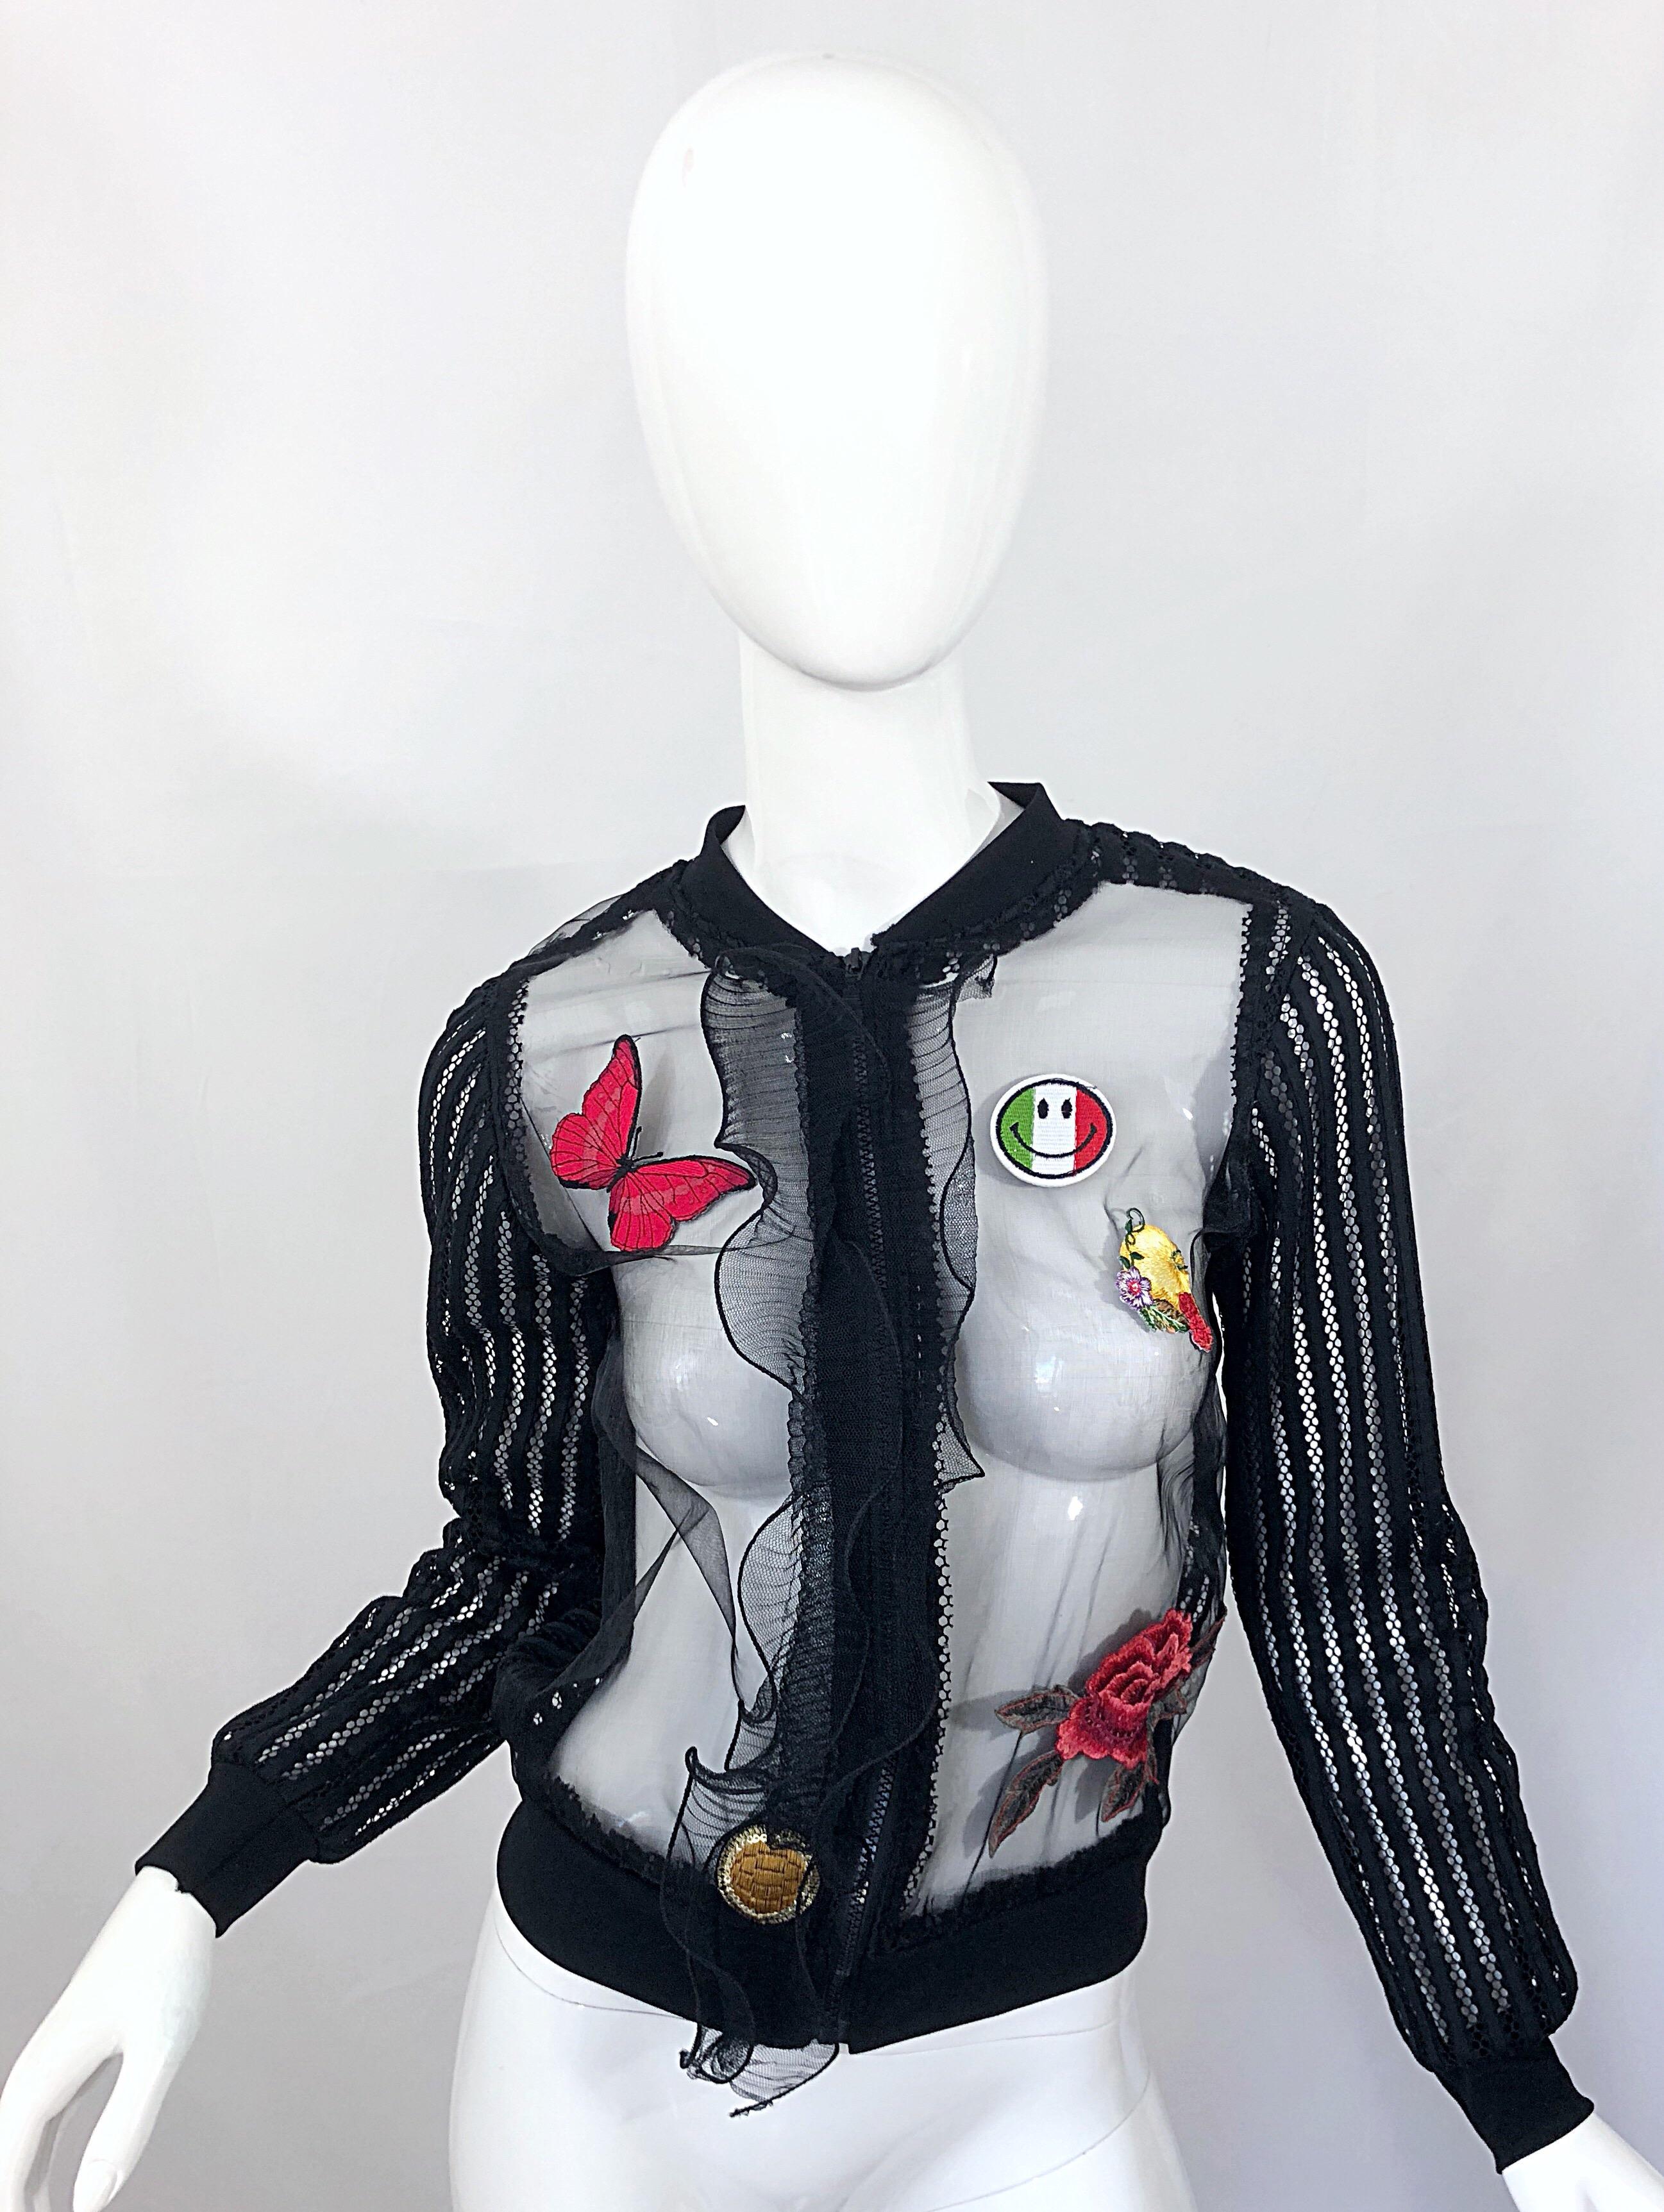 Fantastic vintage 90s MOSCHINO CHEAP & CHIC sheer fishnet zip up jacket / top! Features patchworks thorughout. Avant Garde wired ruffle out the front center. Elastic waistband and sleeve cuffs. The perfect layering piece! In great condition. Made in